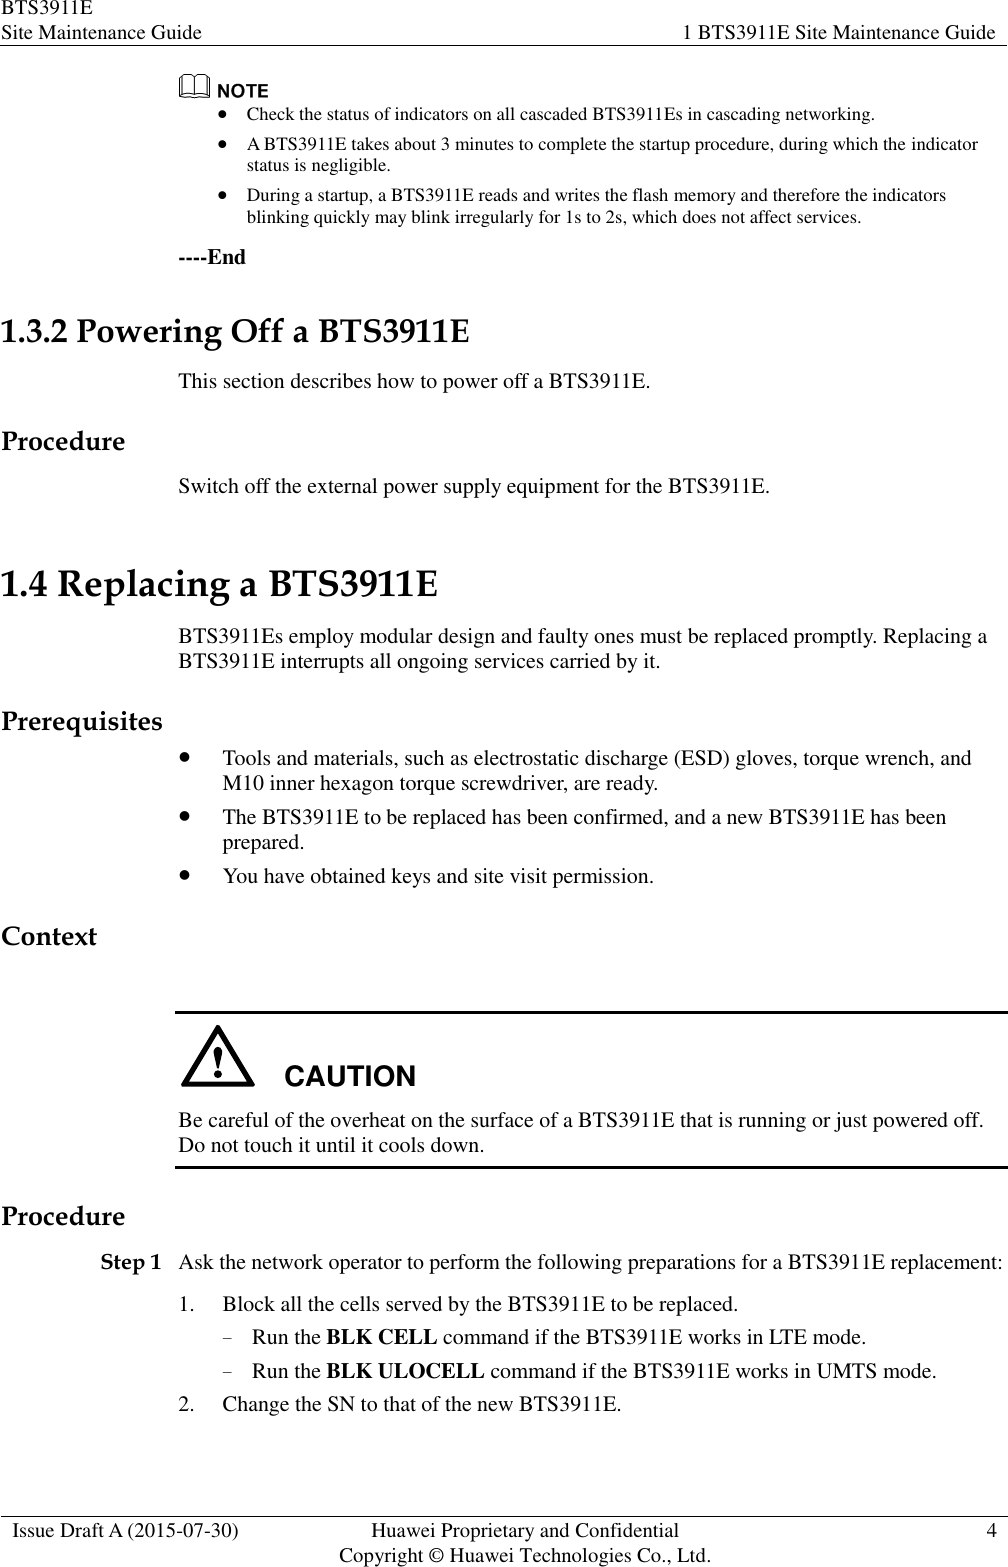 BTS3911E Site Maintenance Guide 1 BTS3911E Site Maintenance Guide  Issue Draft A (2015-07-30) Huawei Proprietary and Confidential           Copyright © Huawei Technologies Co., Ltd. 4    Check the status of indicators on all cascaded BTS3911Es in cascading networking.  A BTS3911E takes about 3 minutes to complete the startup procedure, during which the indicator status is negligible.  During a startup, a BTS3911E reads and writes the flash memory and therefore the indicators blinking quickly may blink irregularly for 1s to 2s, which does not affect services. ----End 1.3.2 Powering Off a BTS3911E This section describes how to power off a BTS3911E. Procedure Switch off the external power supply equipment for the BTS3911E. 1.4 Replacing a BTS3911E BTS3911Es employ modular design and faulty ones must be replaced promptly. Replacing a BTS3911E interrupts all ongoing services carried by it. Prerequisites  Tools and materials, such as electrostatic discharge (ESD) gloves, torque wrench, and M10 inner hexagon torque screwdriver, are ready.  The BTS3911E to be replaced has been confirmed, and a new BTS3911E has been prepared.  You have obtained keys and site visit permission. Context  CAUTION Be careful of the overheat on the surface of a BTS3911E that is running or just powered off. Do not touch it until it cools down. Procedure Step 1 Ask the network operator to perform the following preparations for a BTS3911E replacement: 1. Block all the cells served by the BTS3911E to be replaced. − Run the BLK CELL command if the BTS3911E works in LTE mode. − Run the BLK ULOCELL command if the BTS3911E works in UMTS mode. 2. Change the SN to that of the new BTS3911E. 